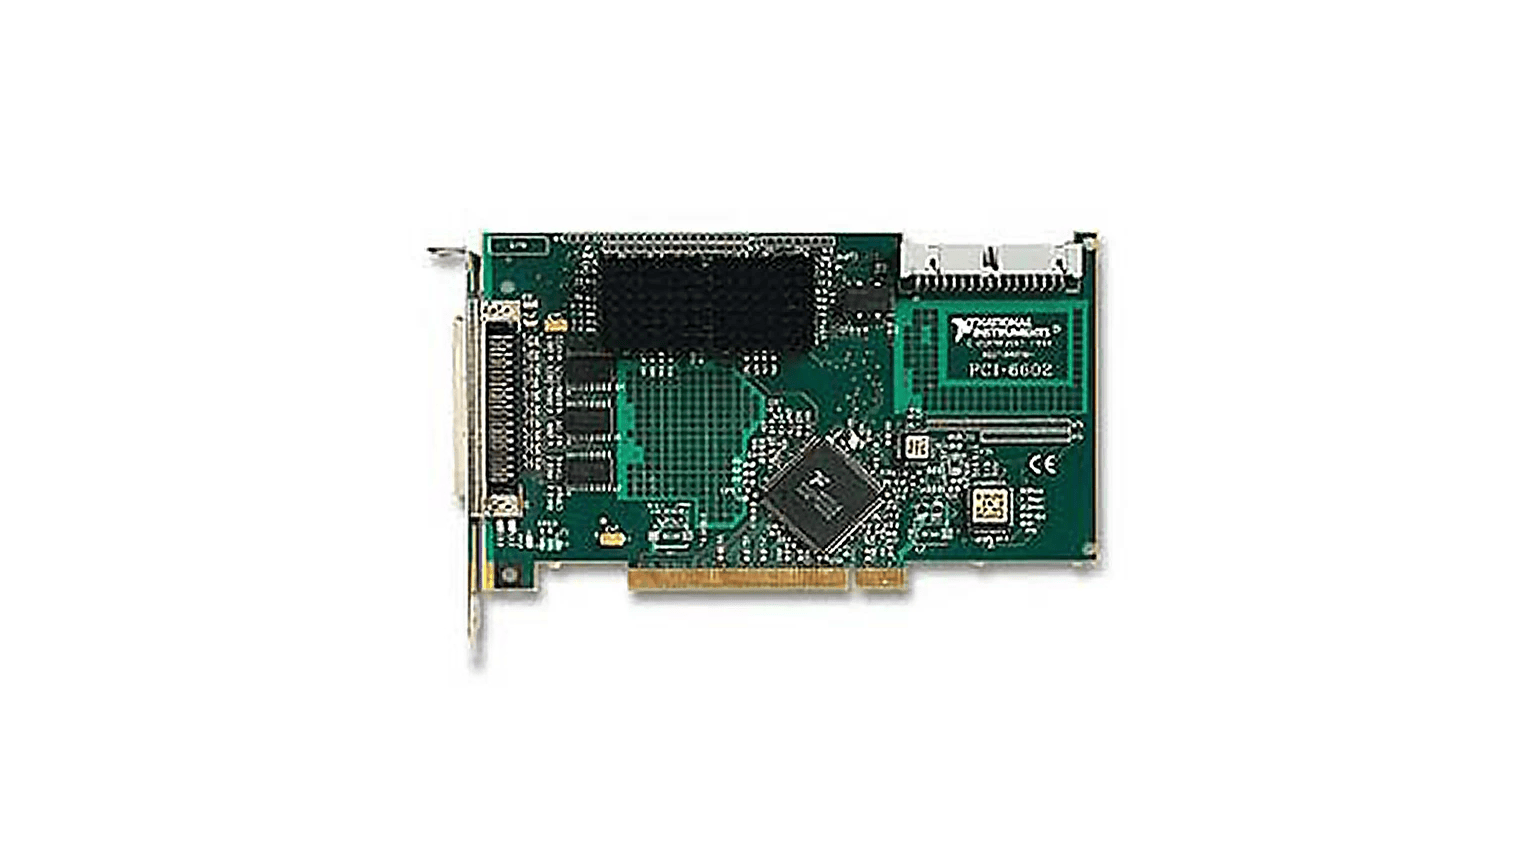 NATIONAL INSTRUMENTS PCI-6602 Counter/Timer 8 up/down 32-bit 80 MHz maximum source frequency (125 MHz with prescalers) Up to 32 digital I/O lines (5 V/TTL)